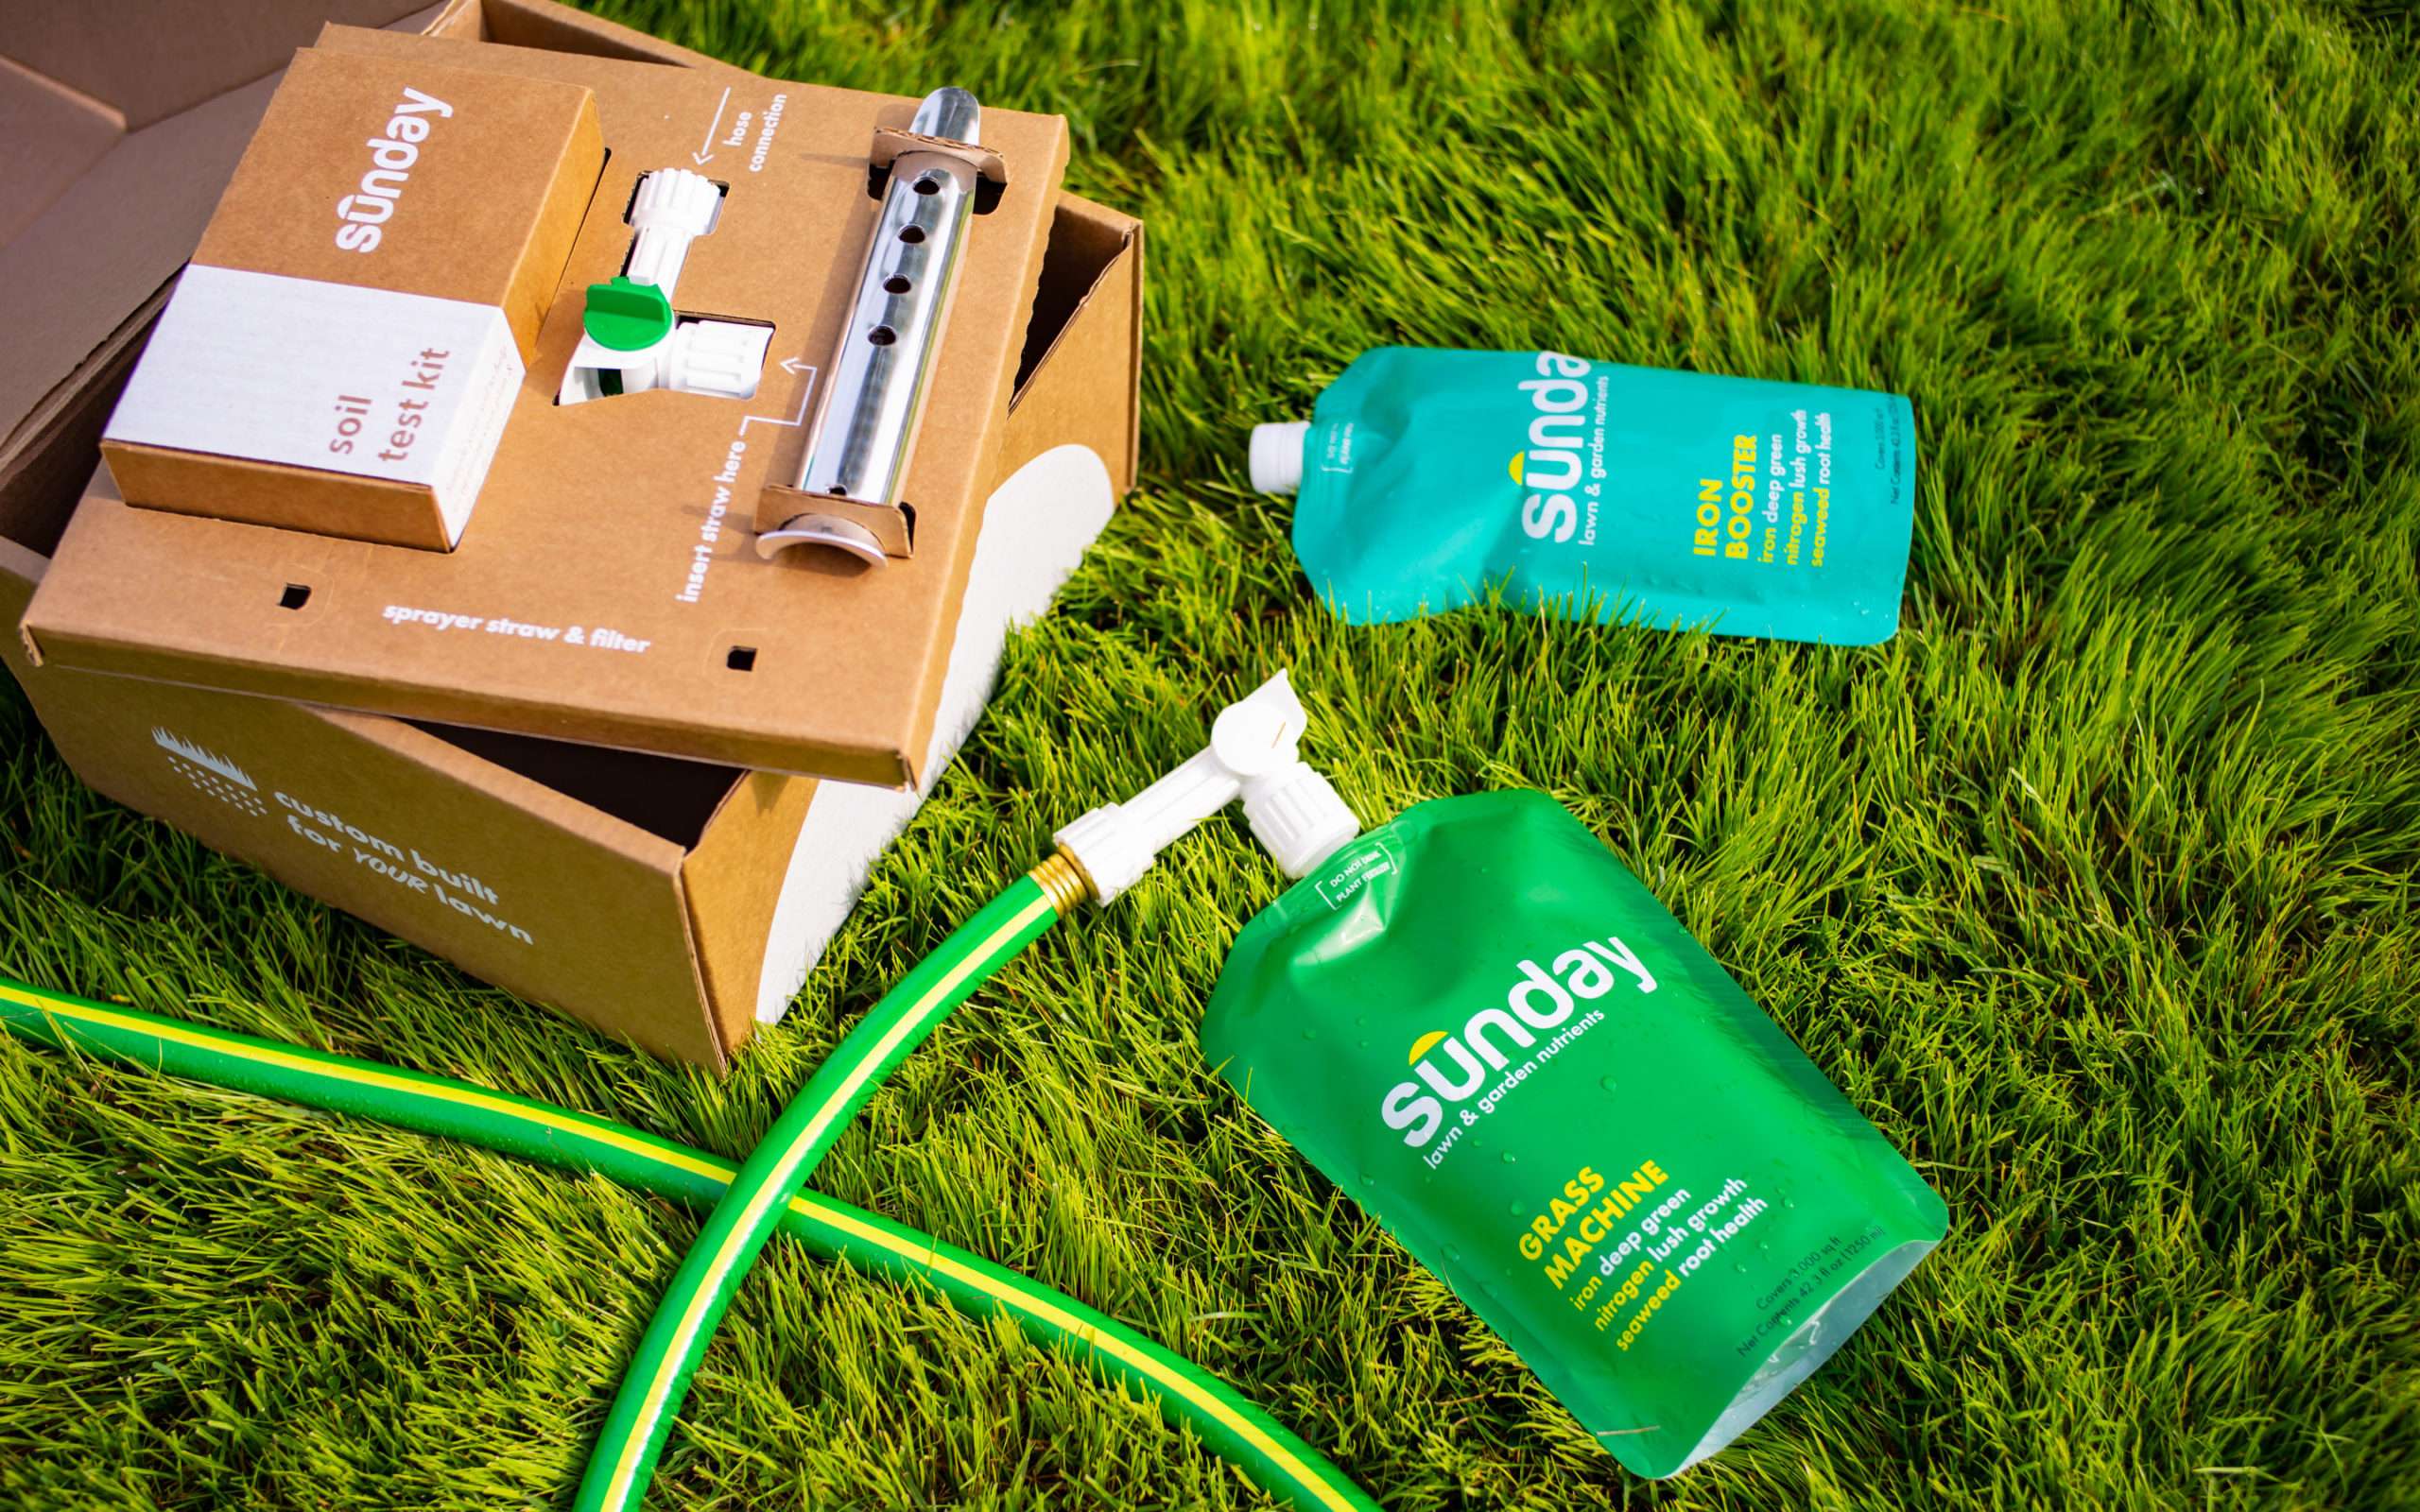 How One Company Made Lawn Care Ethical